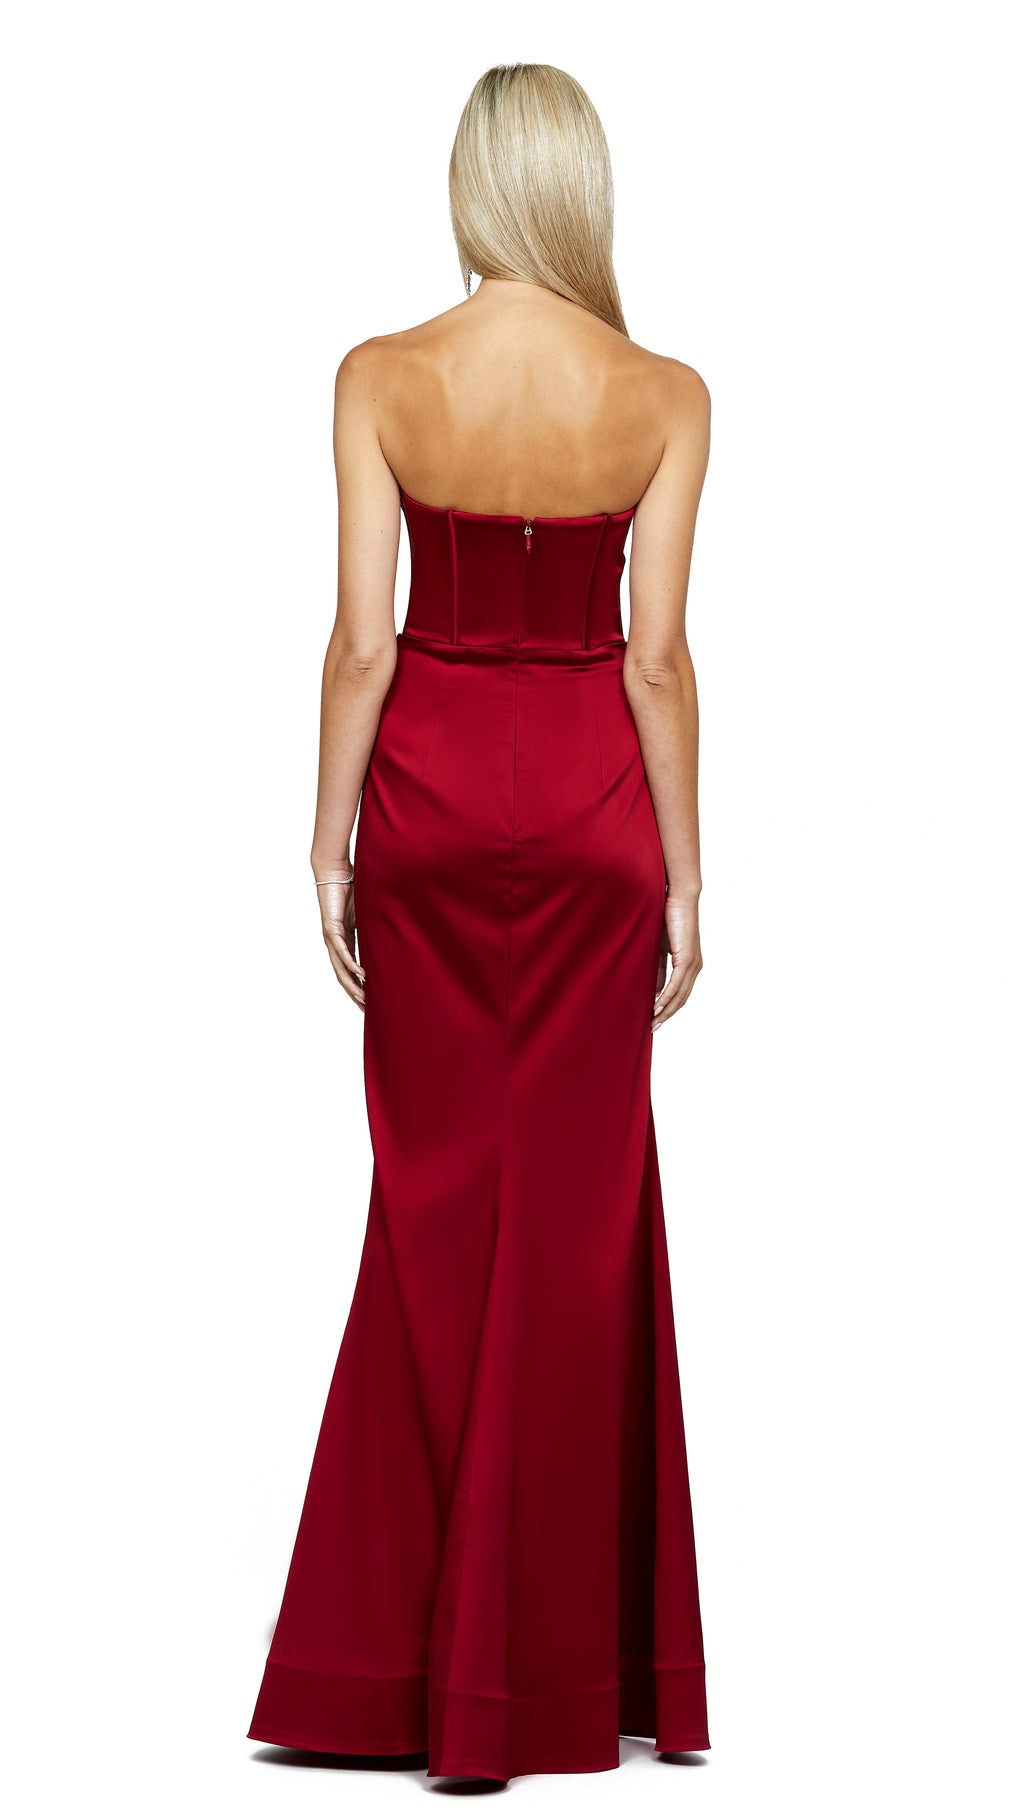 Gess Off Shoulder Fishtail Gown in Burgundy Red BACK